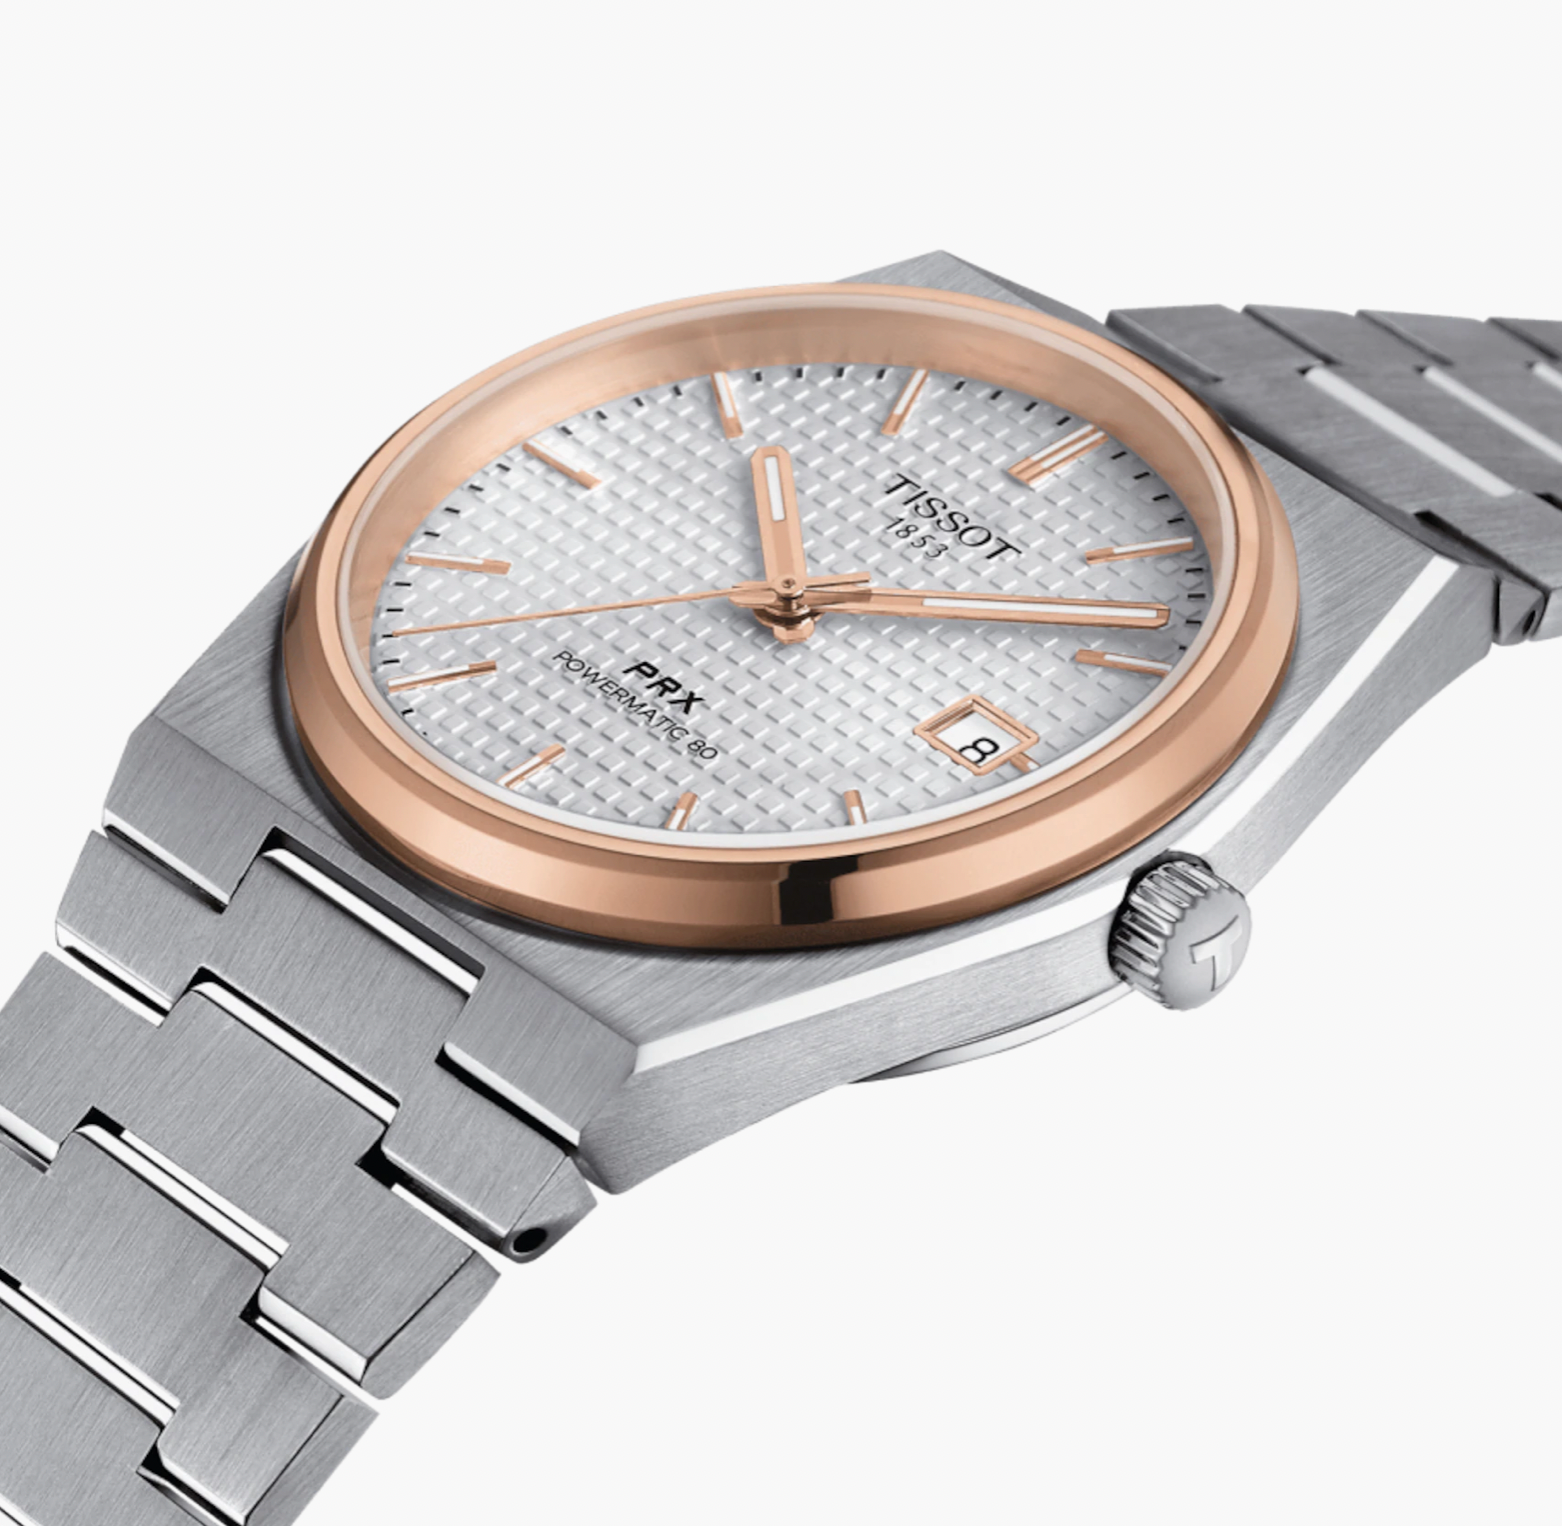 TISSOT PRX POWERMATIC 80 Silver and Rose Gold Besel | Tissot | Luby 